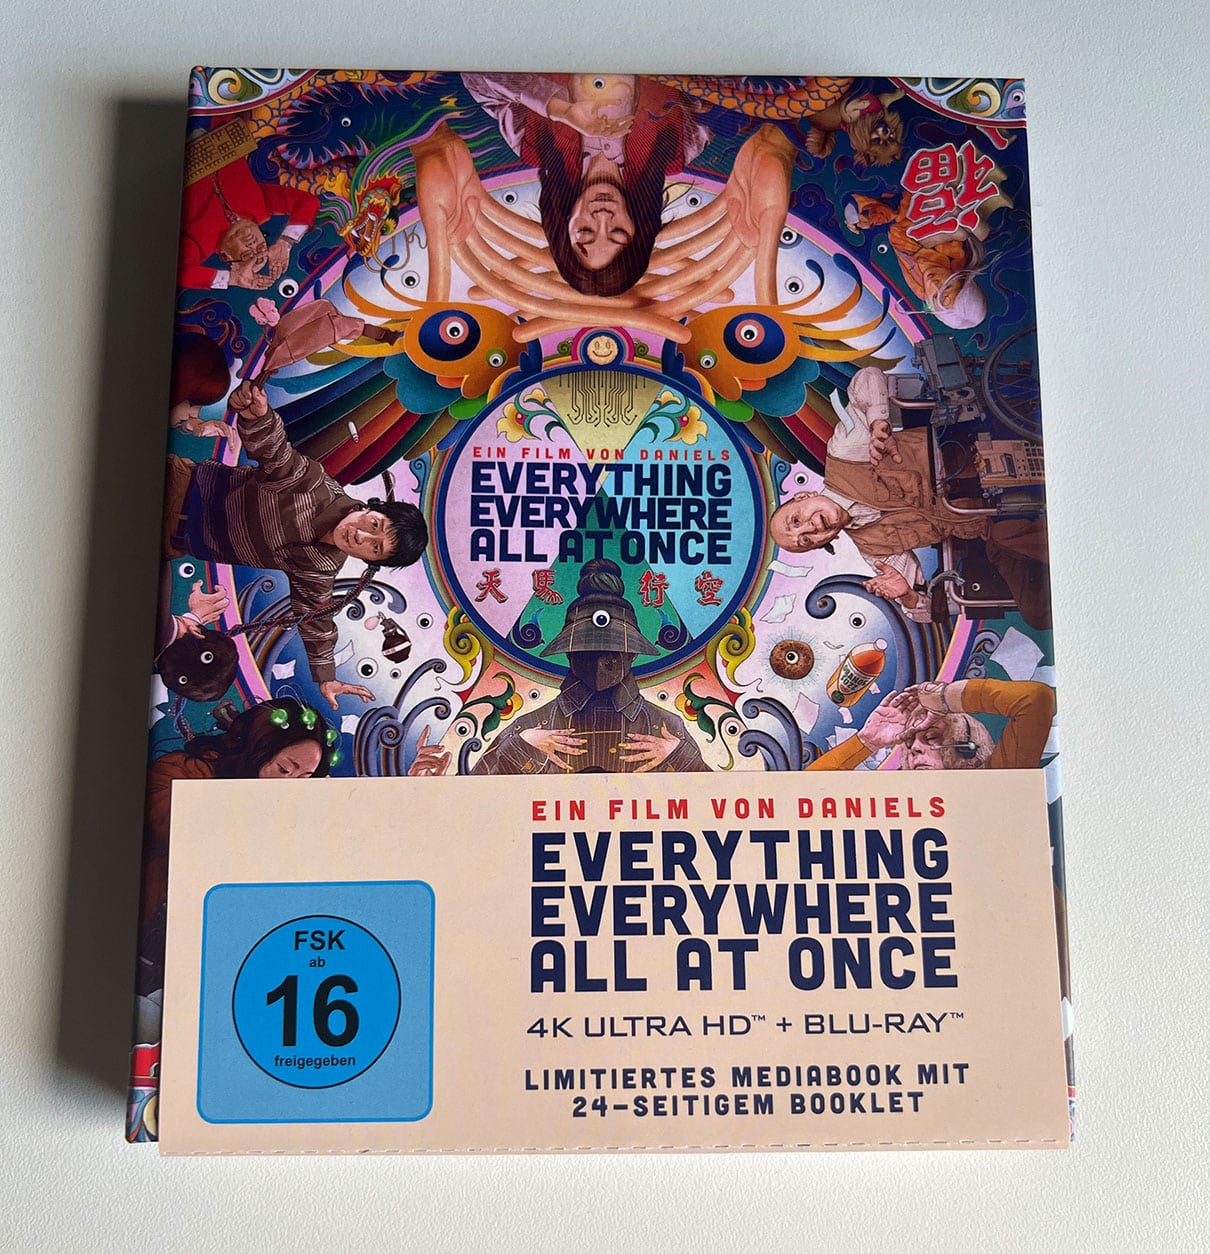 [Fotostrecke] Everything Everywhere All At Once (4K Ultra HD Blu-Ray & Blu-Ray) Limited Mediabook Edition